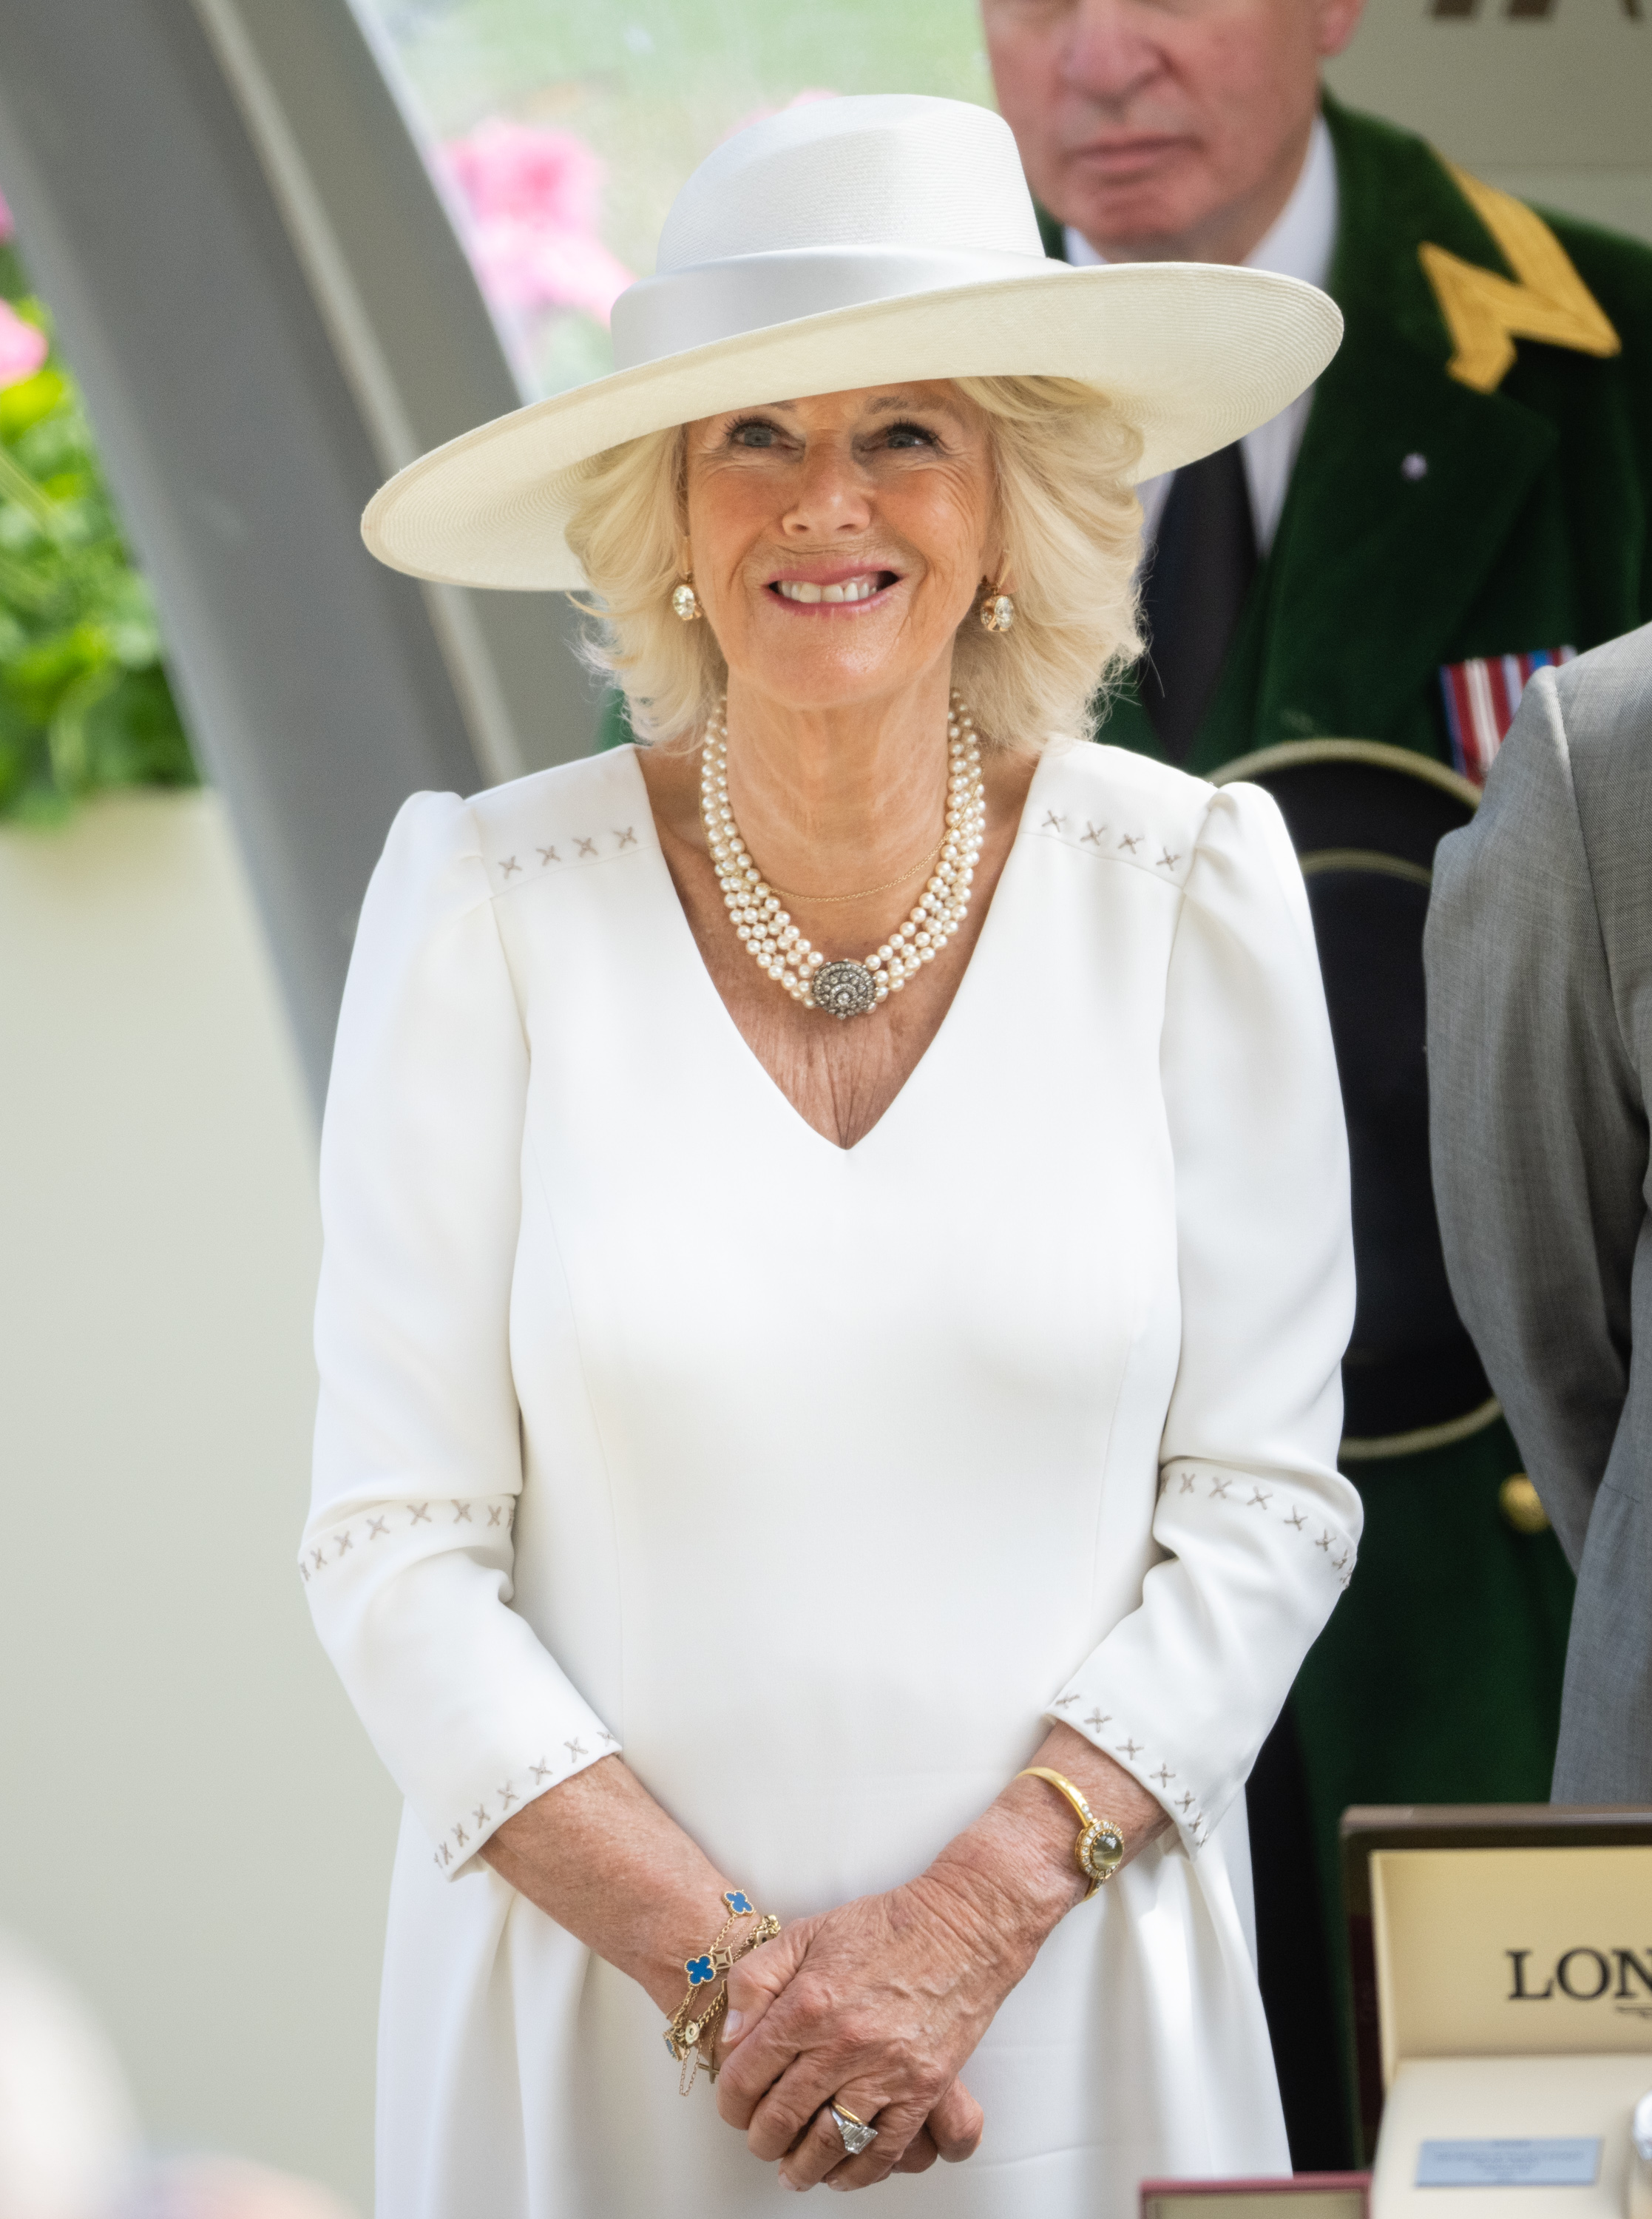 Camilla Parker Bowles stands with her hands clasped in front of her at the Royal Ascot.